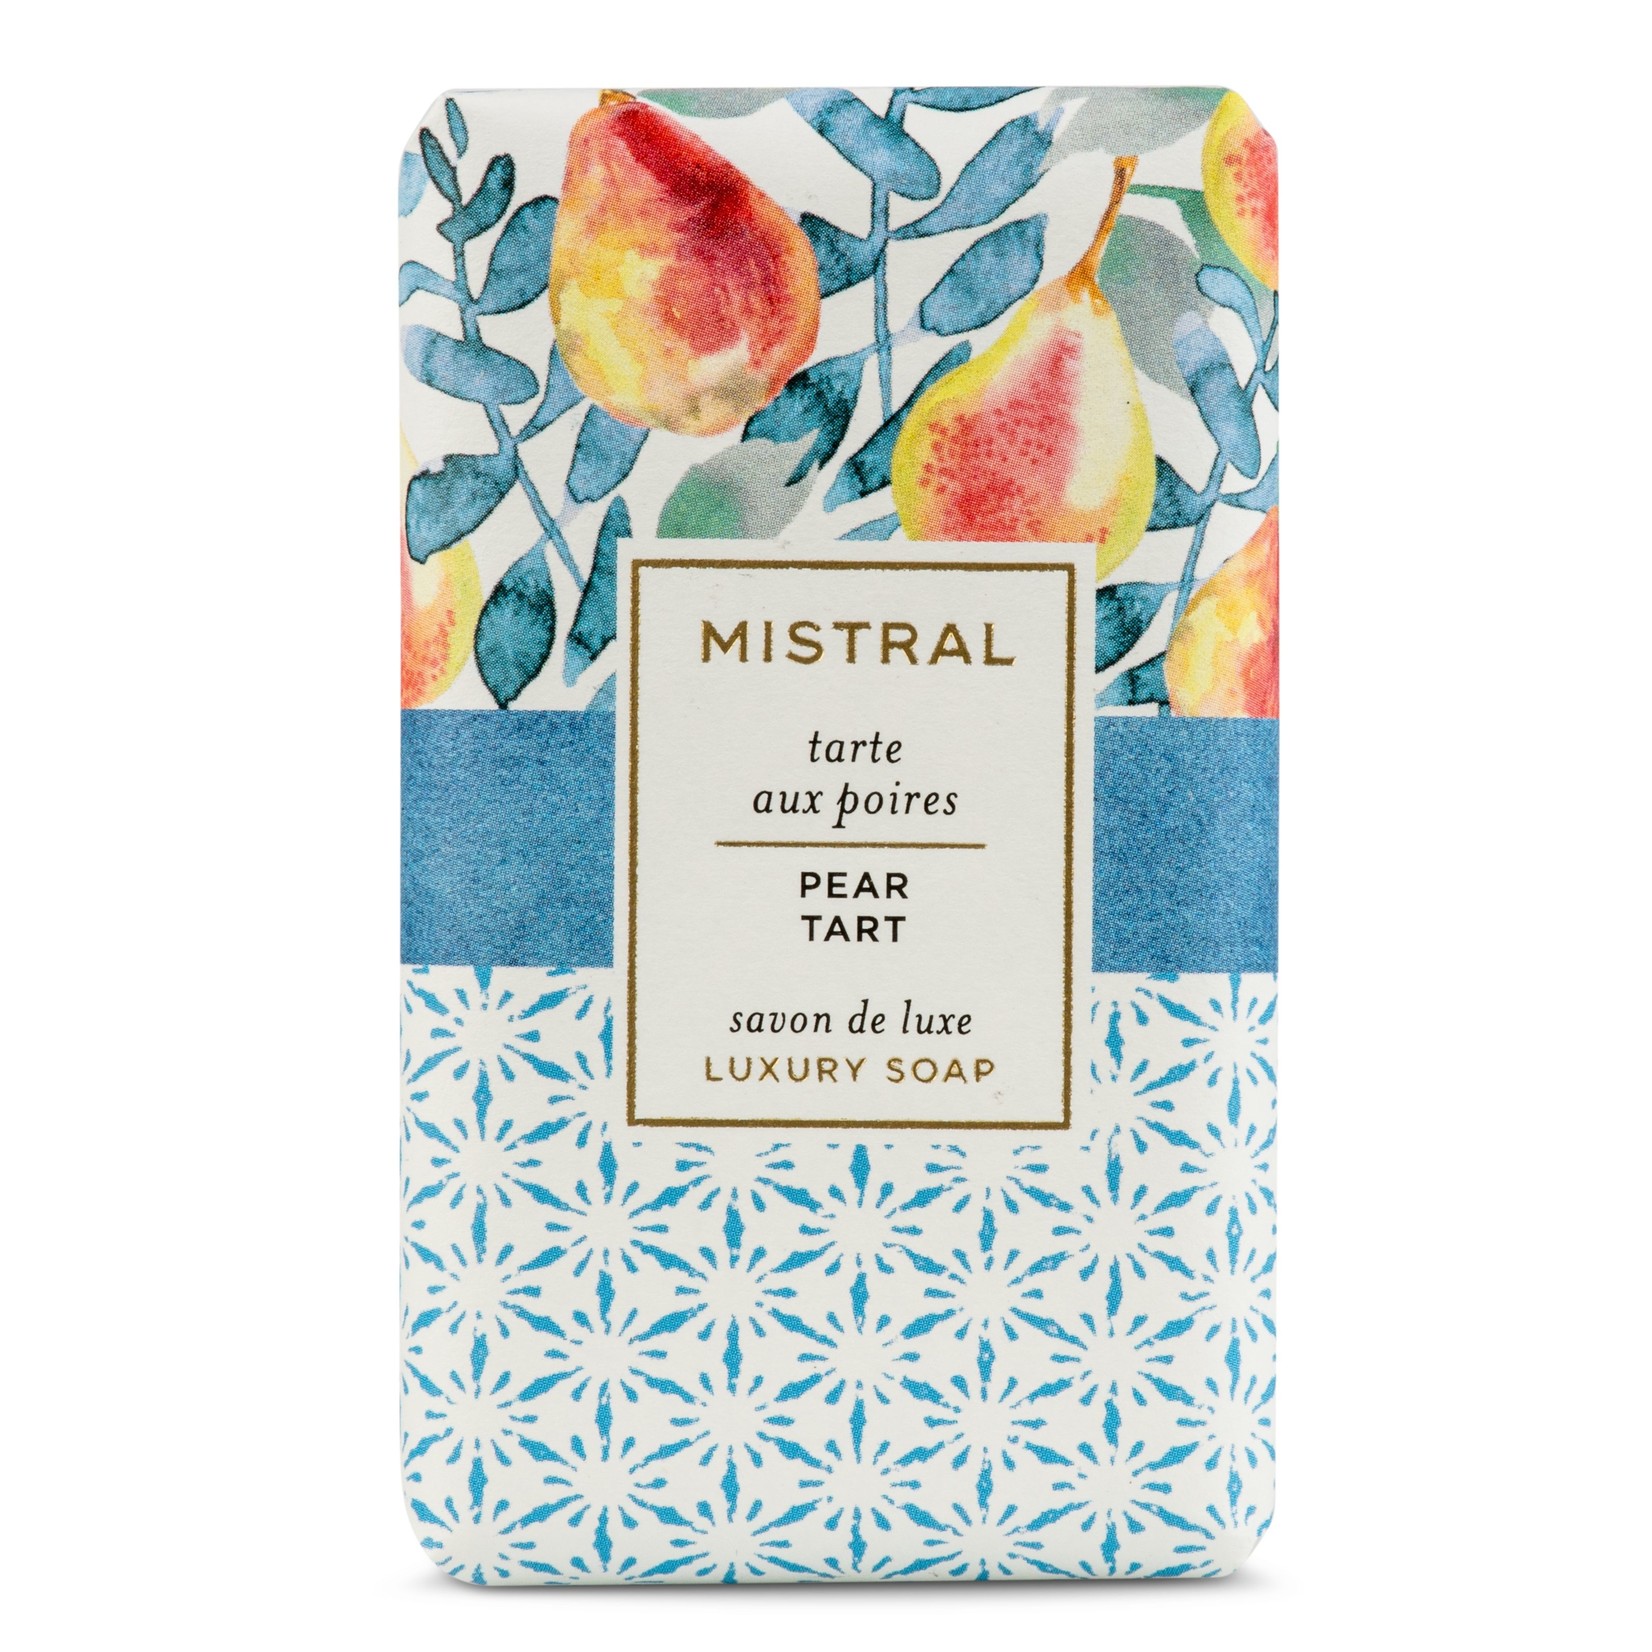 Mistral Papiers Fantaisie Bar Soap Holiday Collection